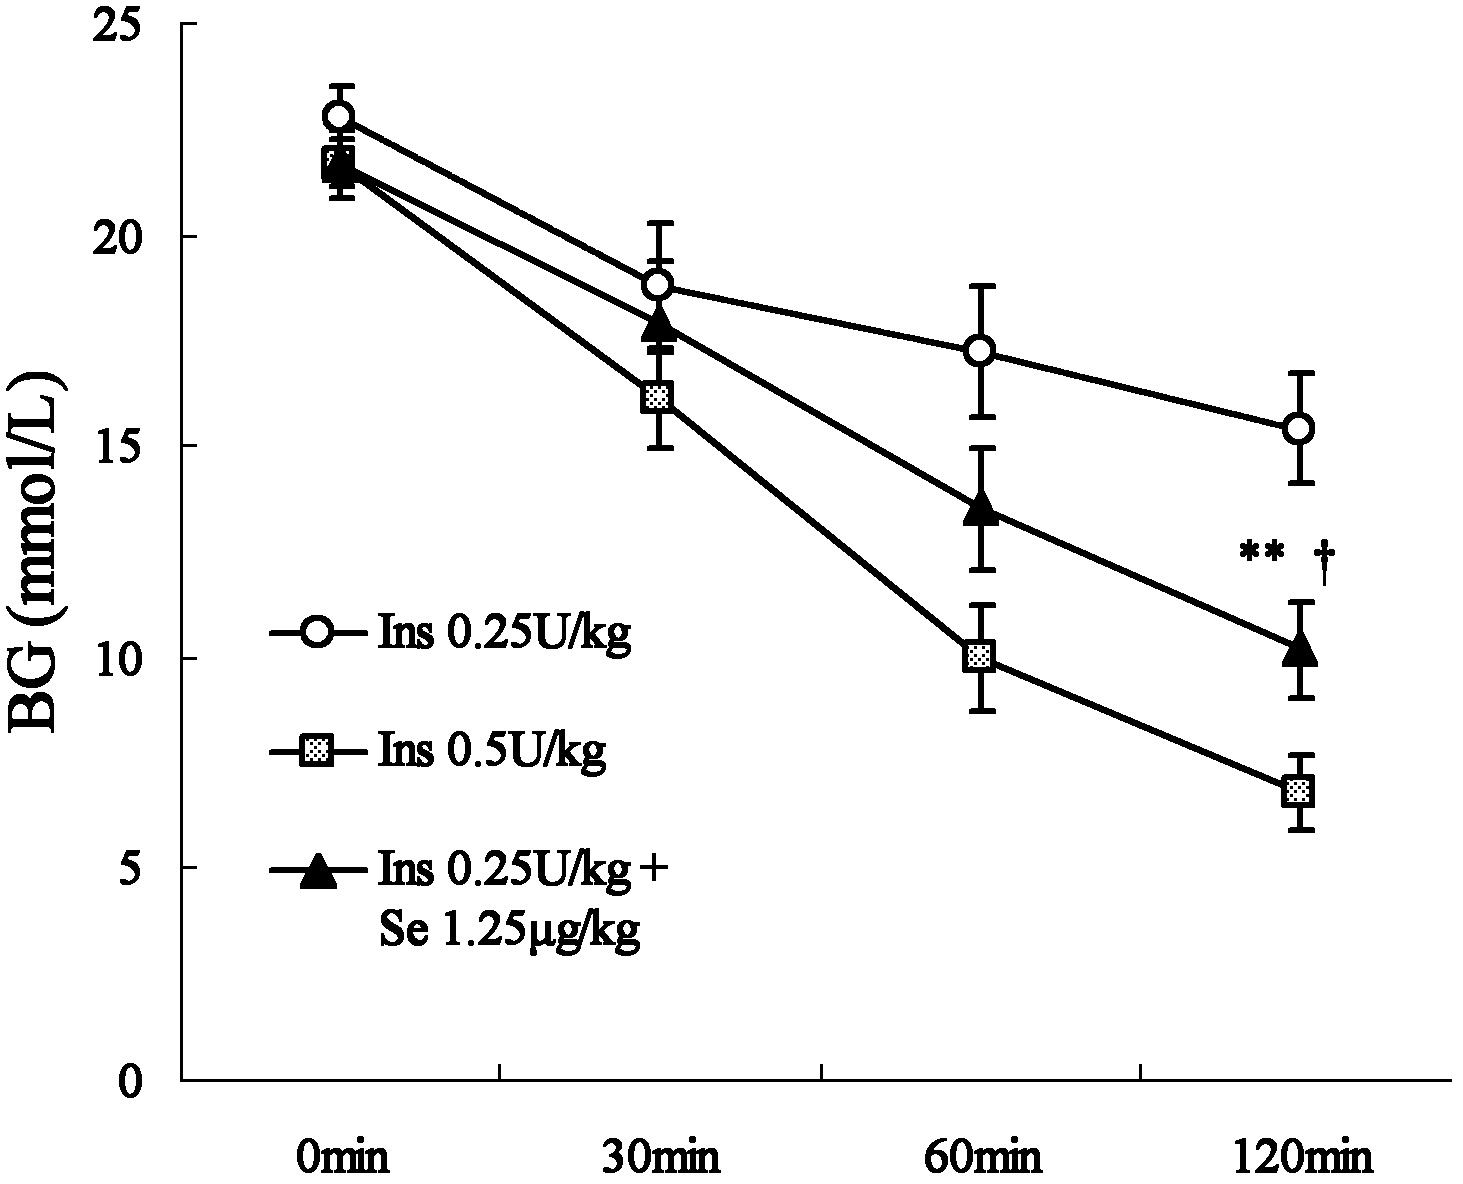 Blood-sugar-reducing composition and application thereof